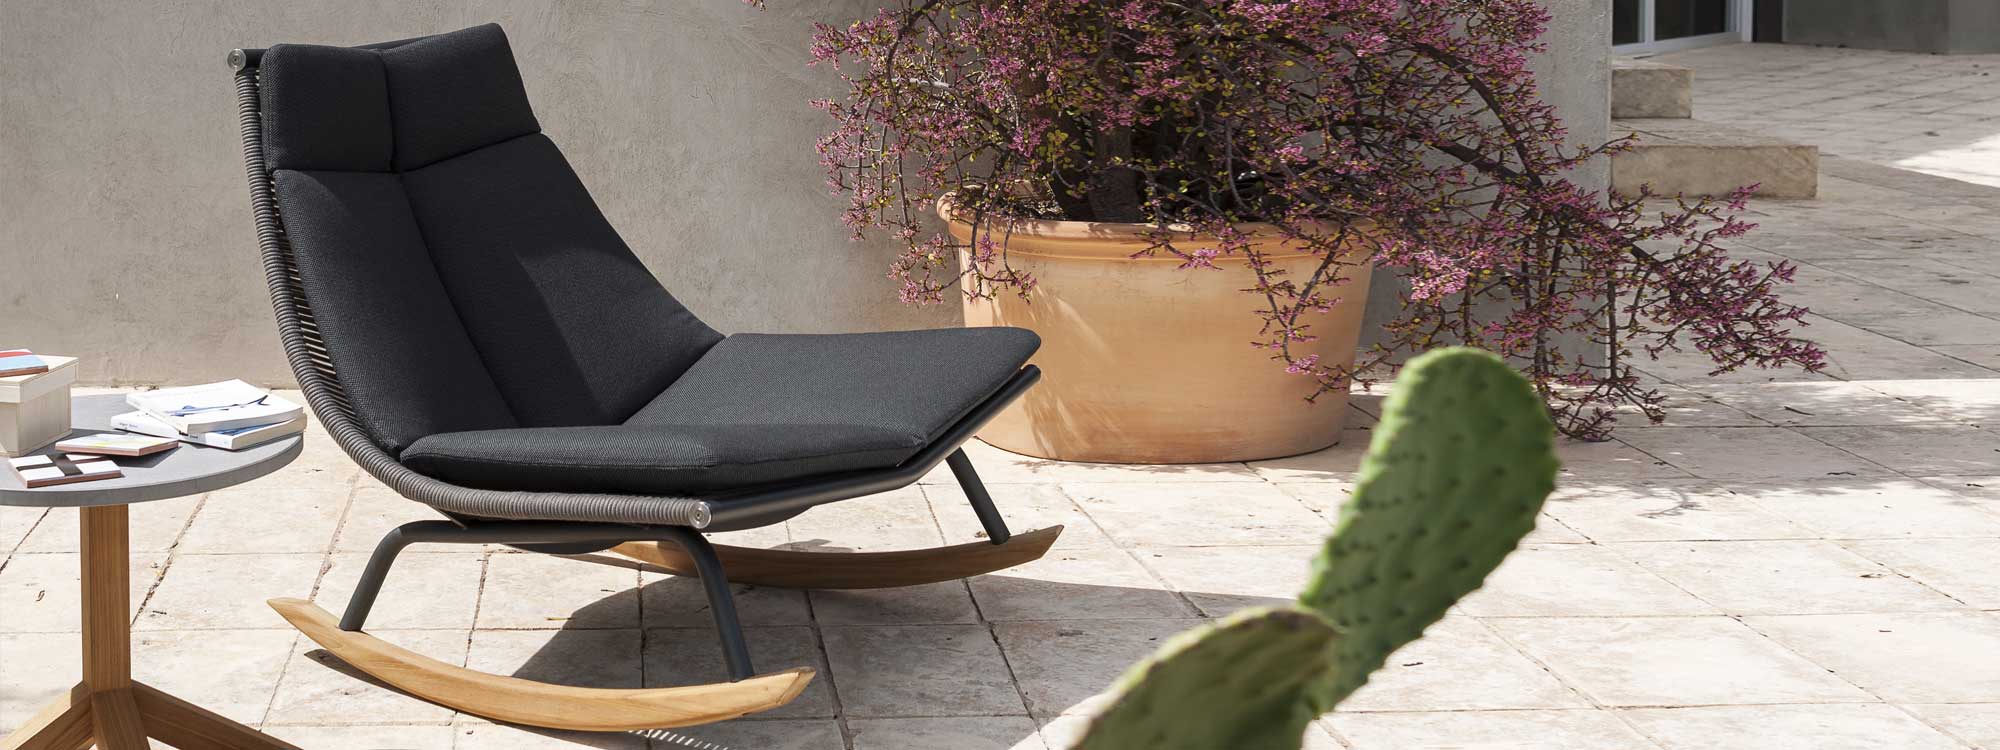 Image of RODA Laze modern outdoor rocking chair with teak skids and black cushion next to Root teak side table, with cactus in foreground